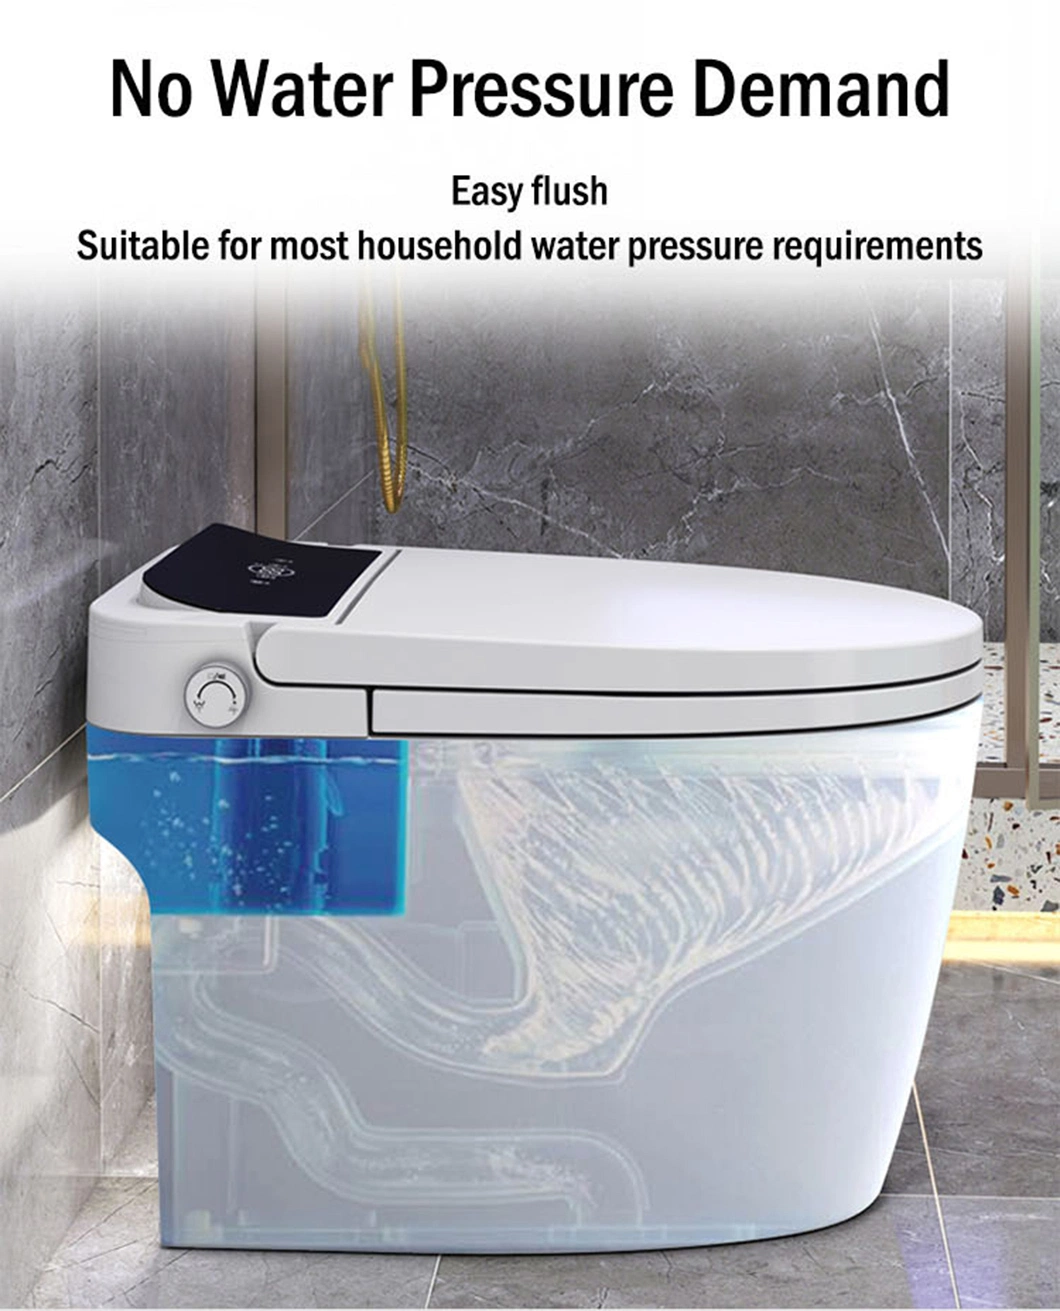 Self Cleaning Sensor Smart Toilet Automatic Flush Remote Control Heated Inodoros Intelligent Toilet with Warm Seat